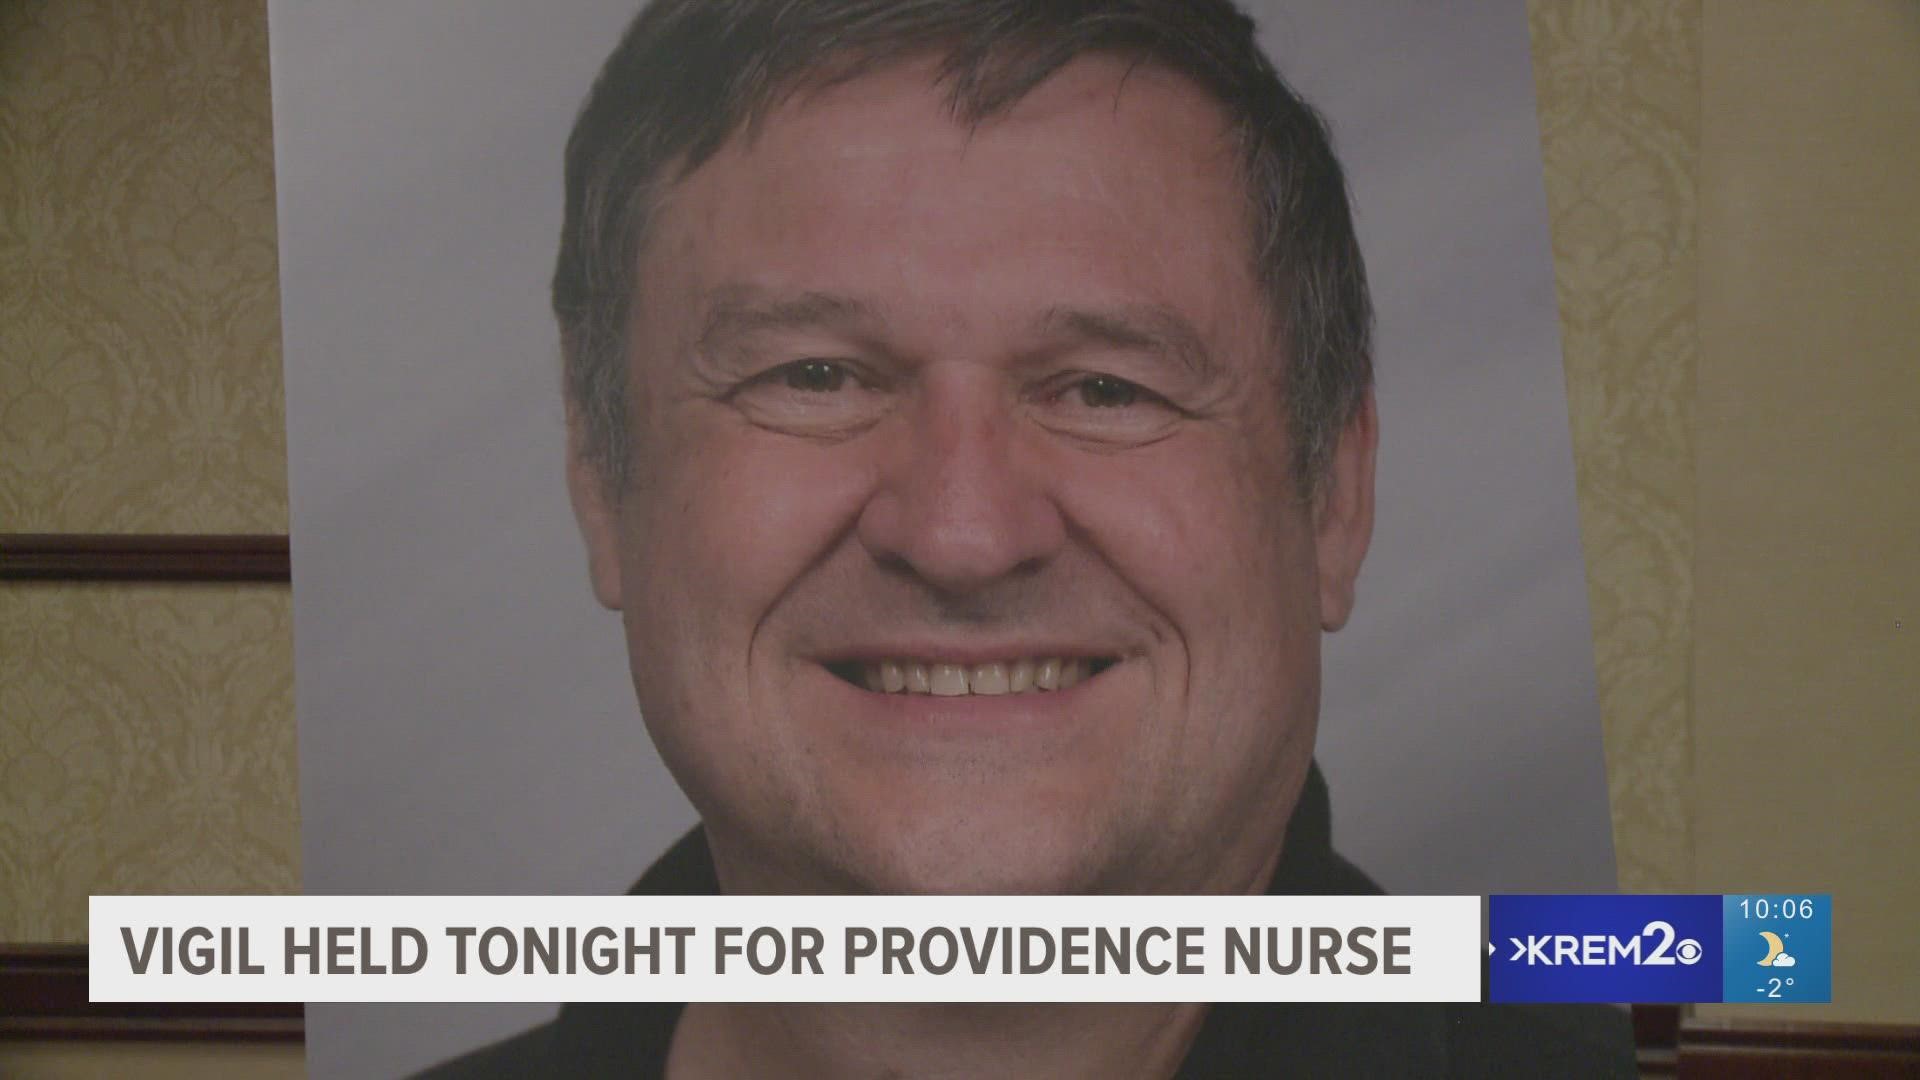 Doug Brant's colleagues said being a nurse was more than just a job, it was his calling.